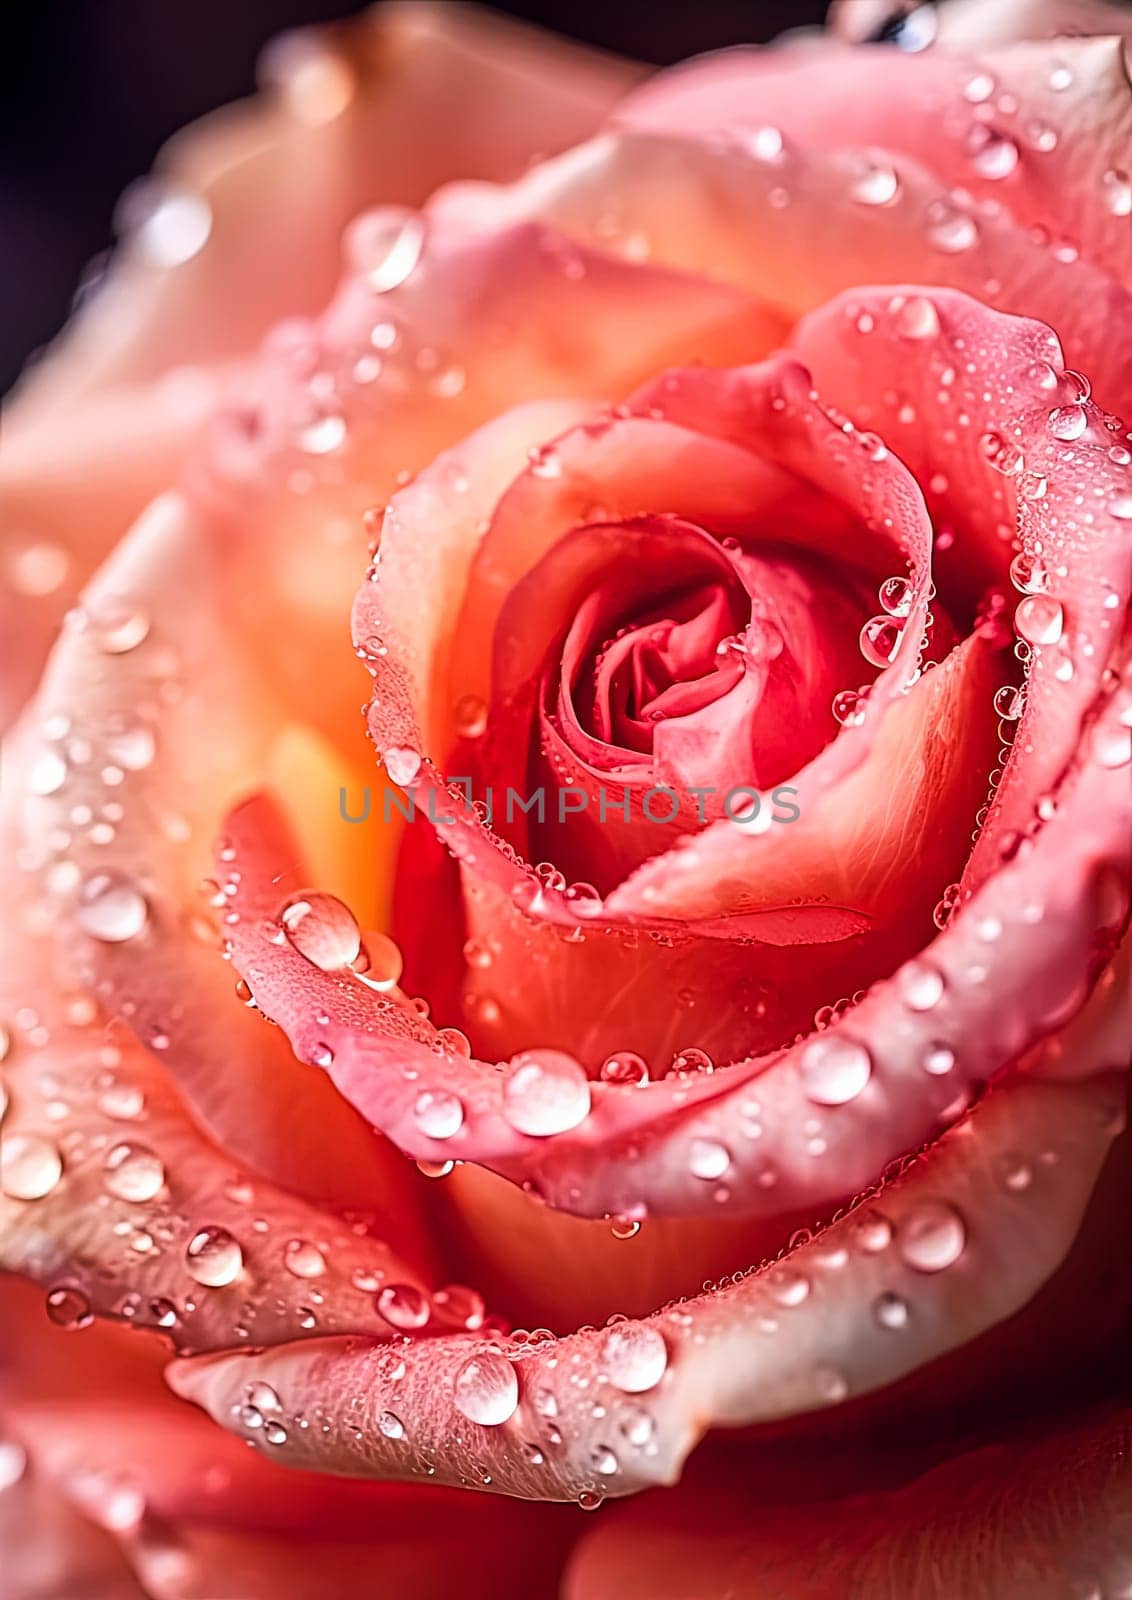 A close up of a red rose with water droplets on it. The droplets give the rose a fresh and vibrant appearance by Alla_Morozova93